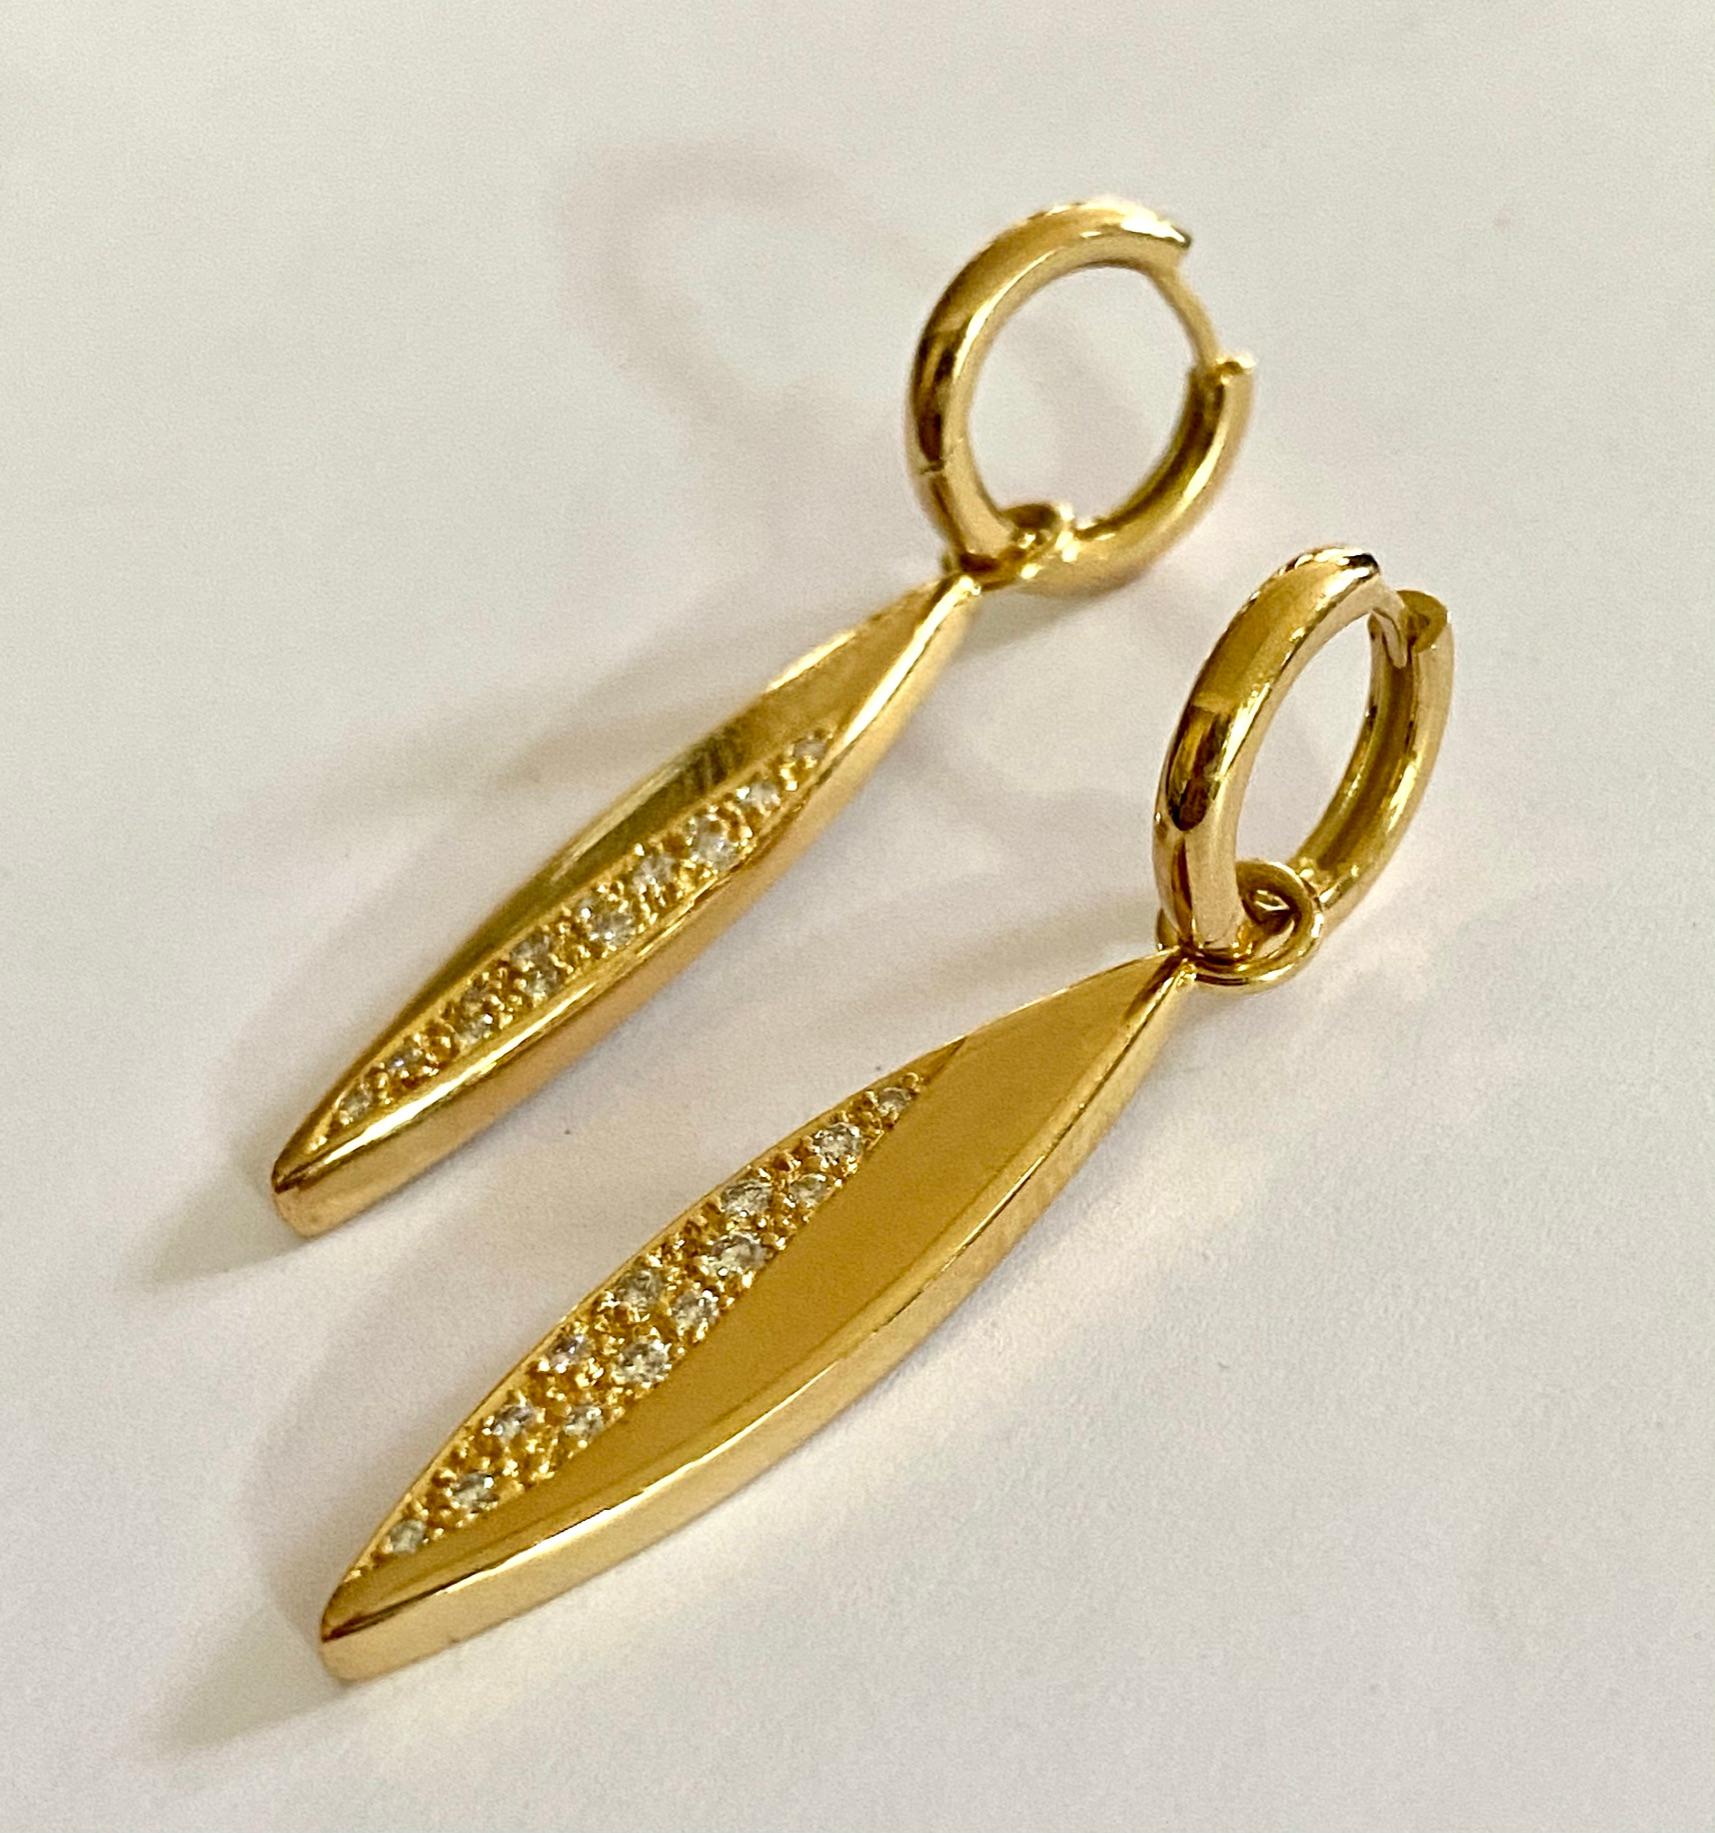 A pair of 18K. yellow gold earrings consisting of a hoop of 13 mm diameter (hinge) and a pastil-shaped attachment of 32 x 7.5 x 2 mm. Stamped: 750 and F + (brilliant mark).
set with 26 brilliant cut natural diamonds weighing together: 0.40 ct.